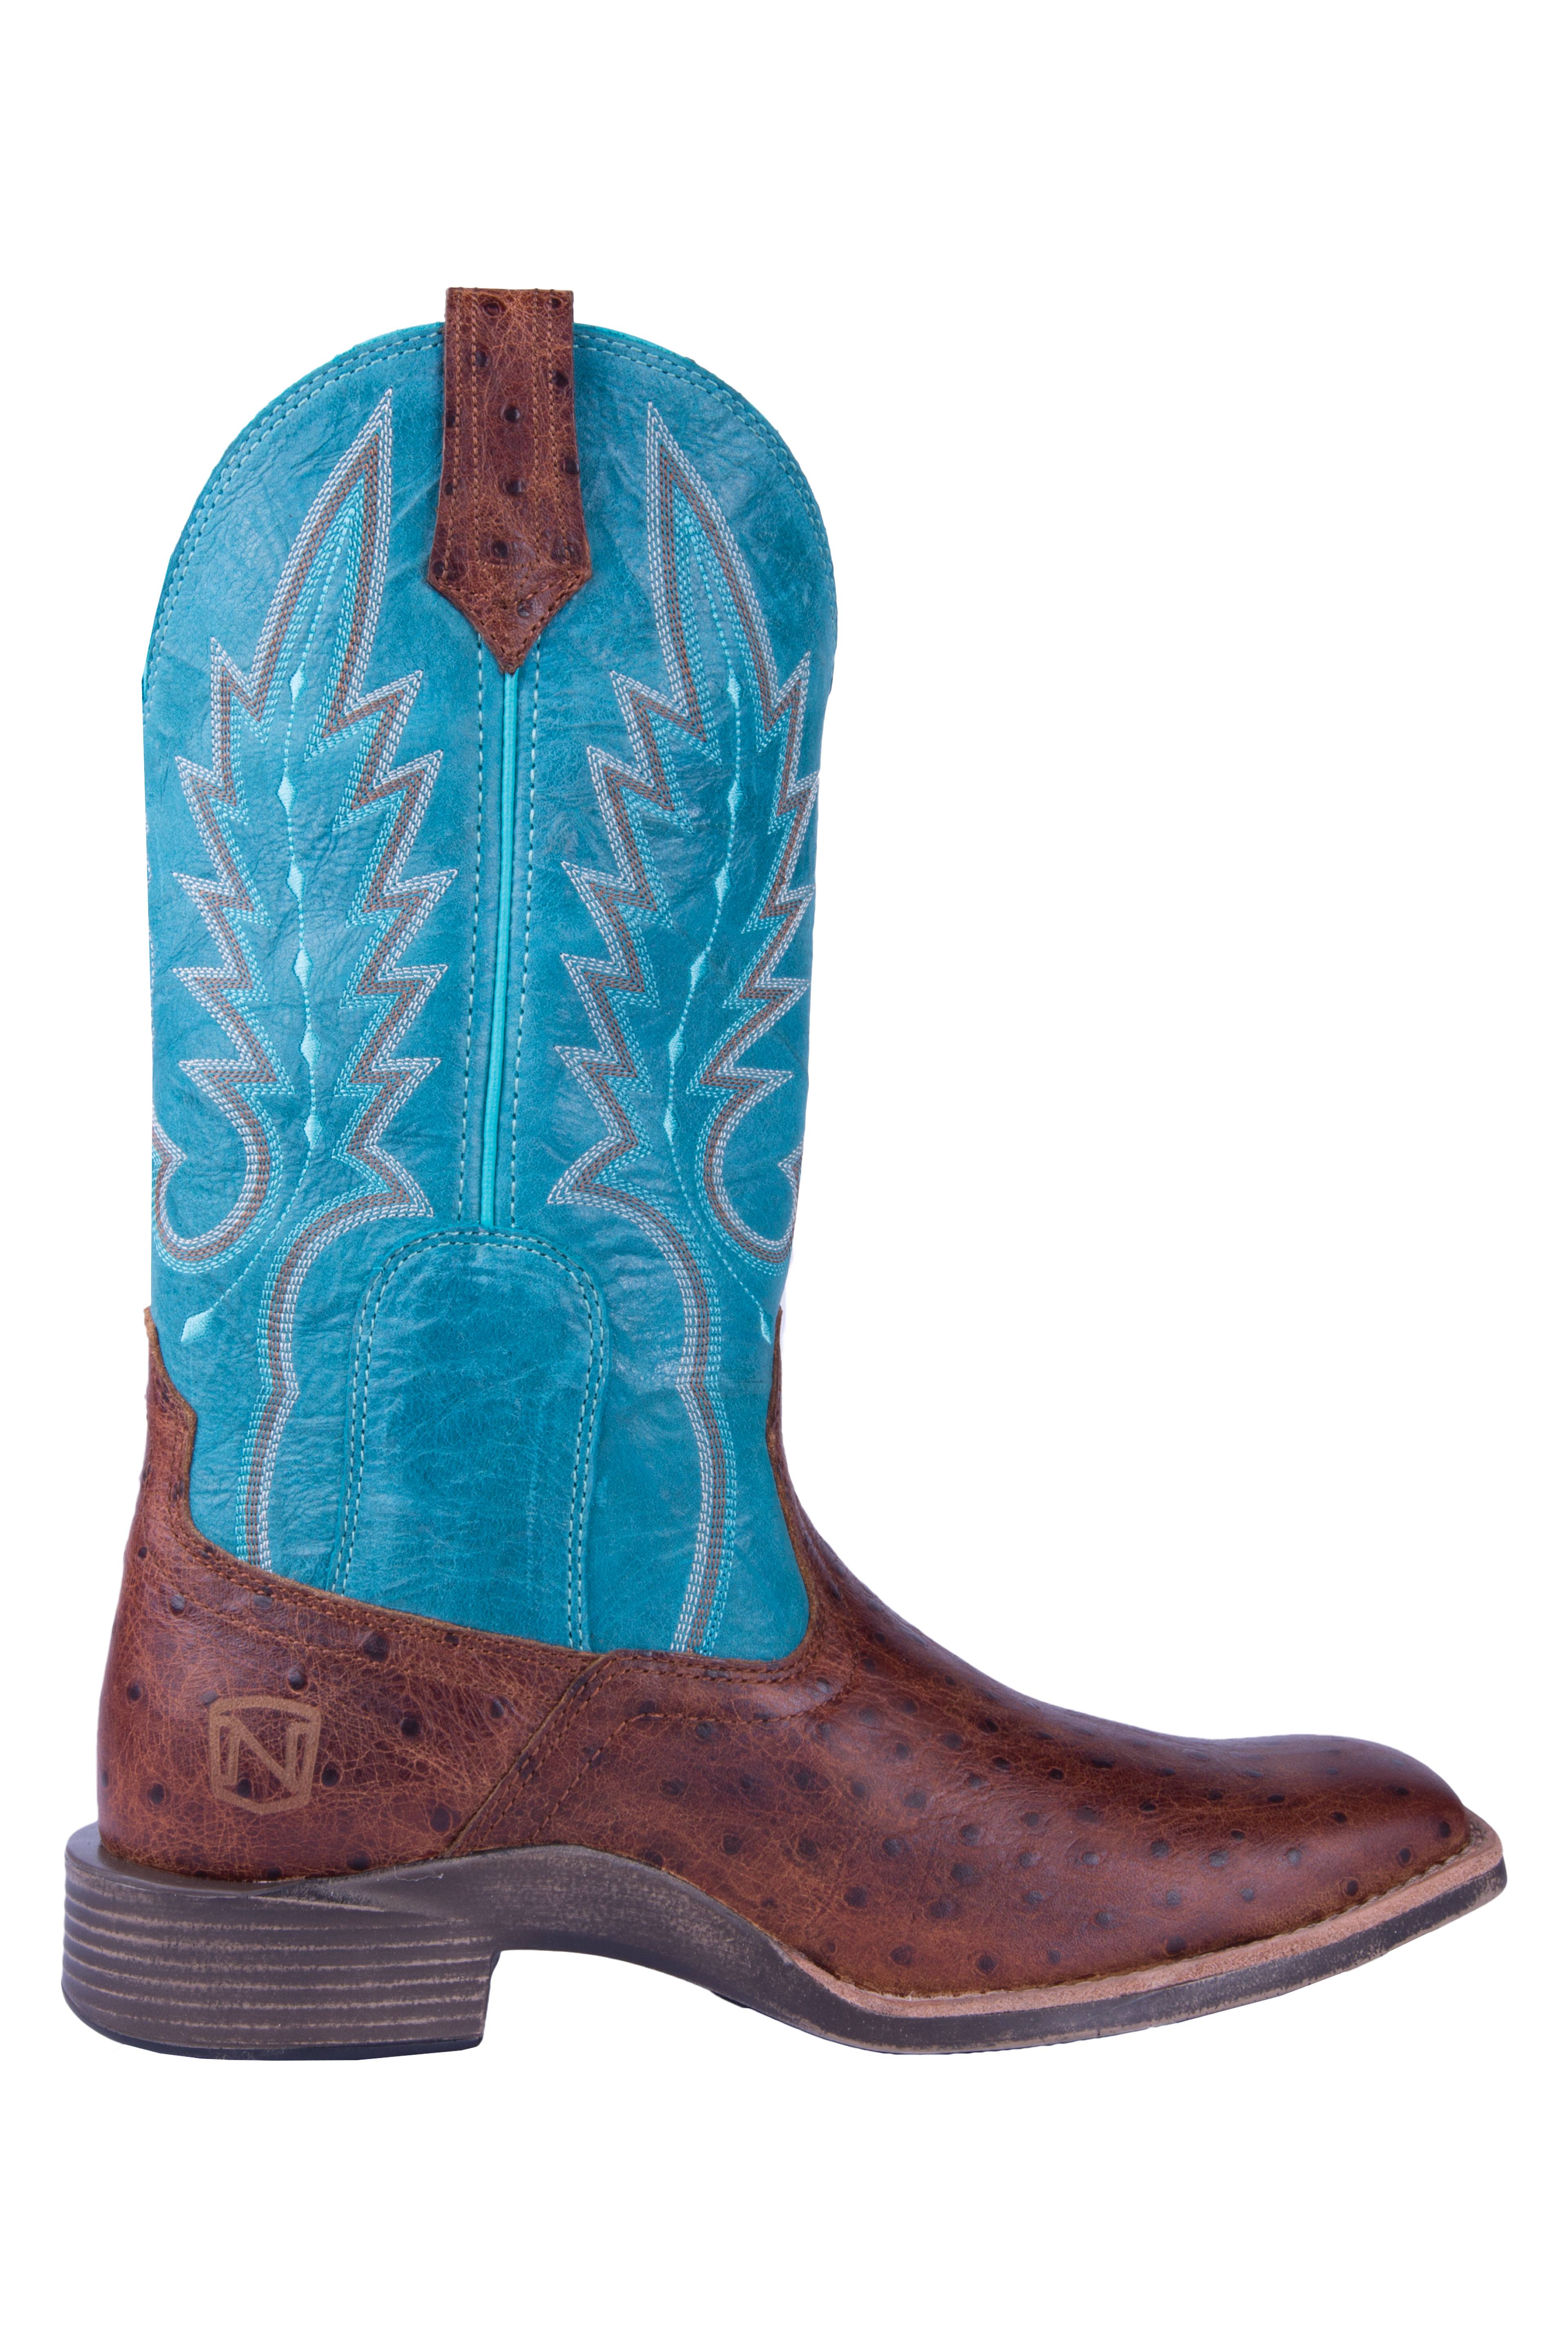 Noble Outfitters All Around Square Toe Cheyenne Boots - Ladies